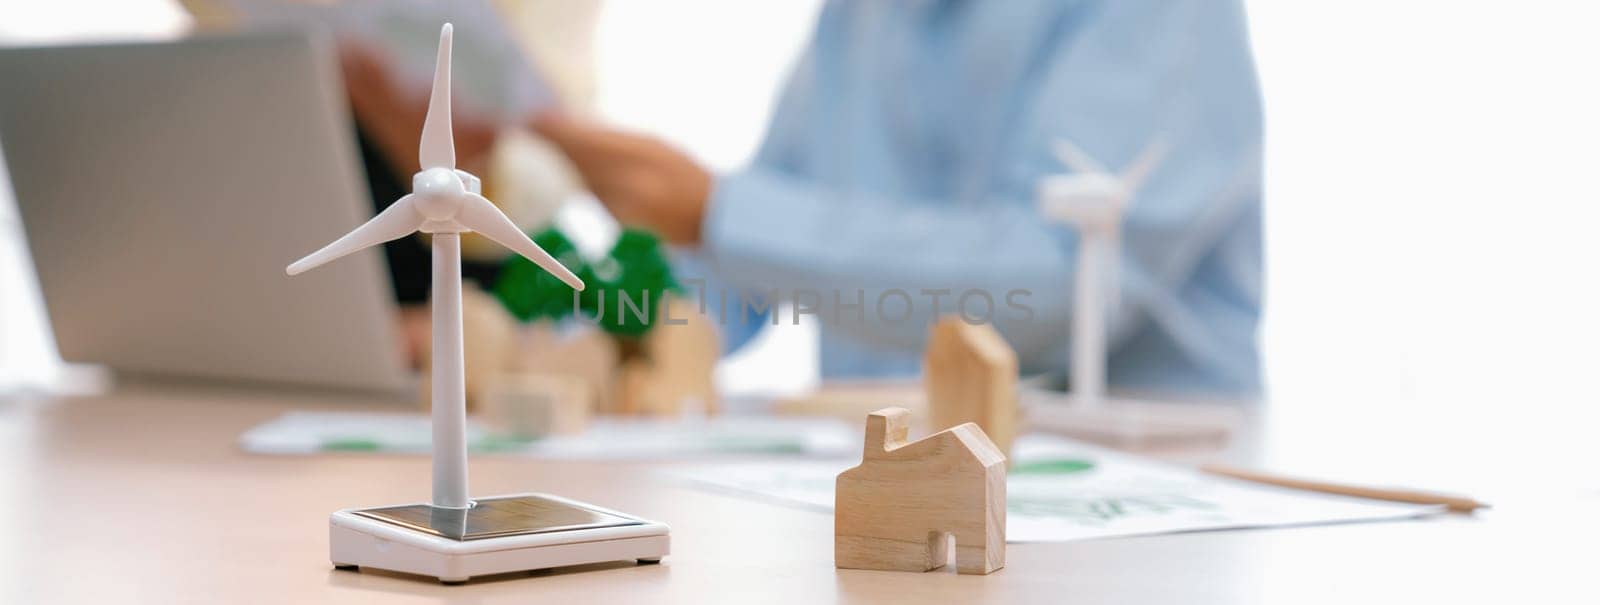 Windmill model represented using clean energy and wooden block represented eco house was scatter around on the table in front of businessman working on laptop. Blurring background. Delineation.